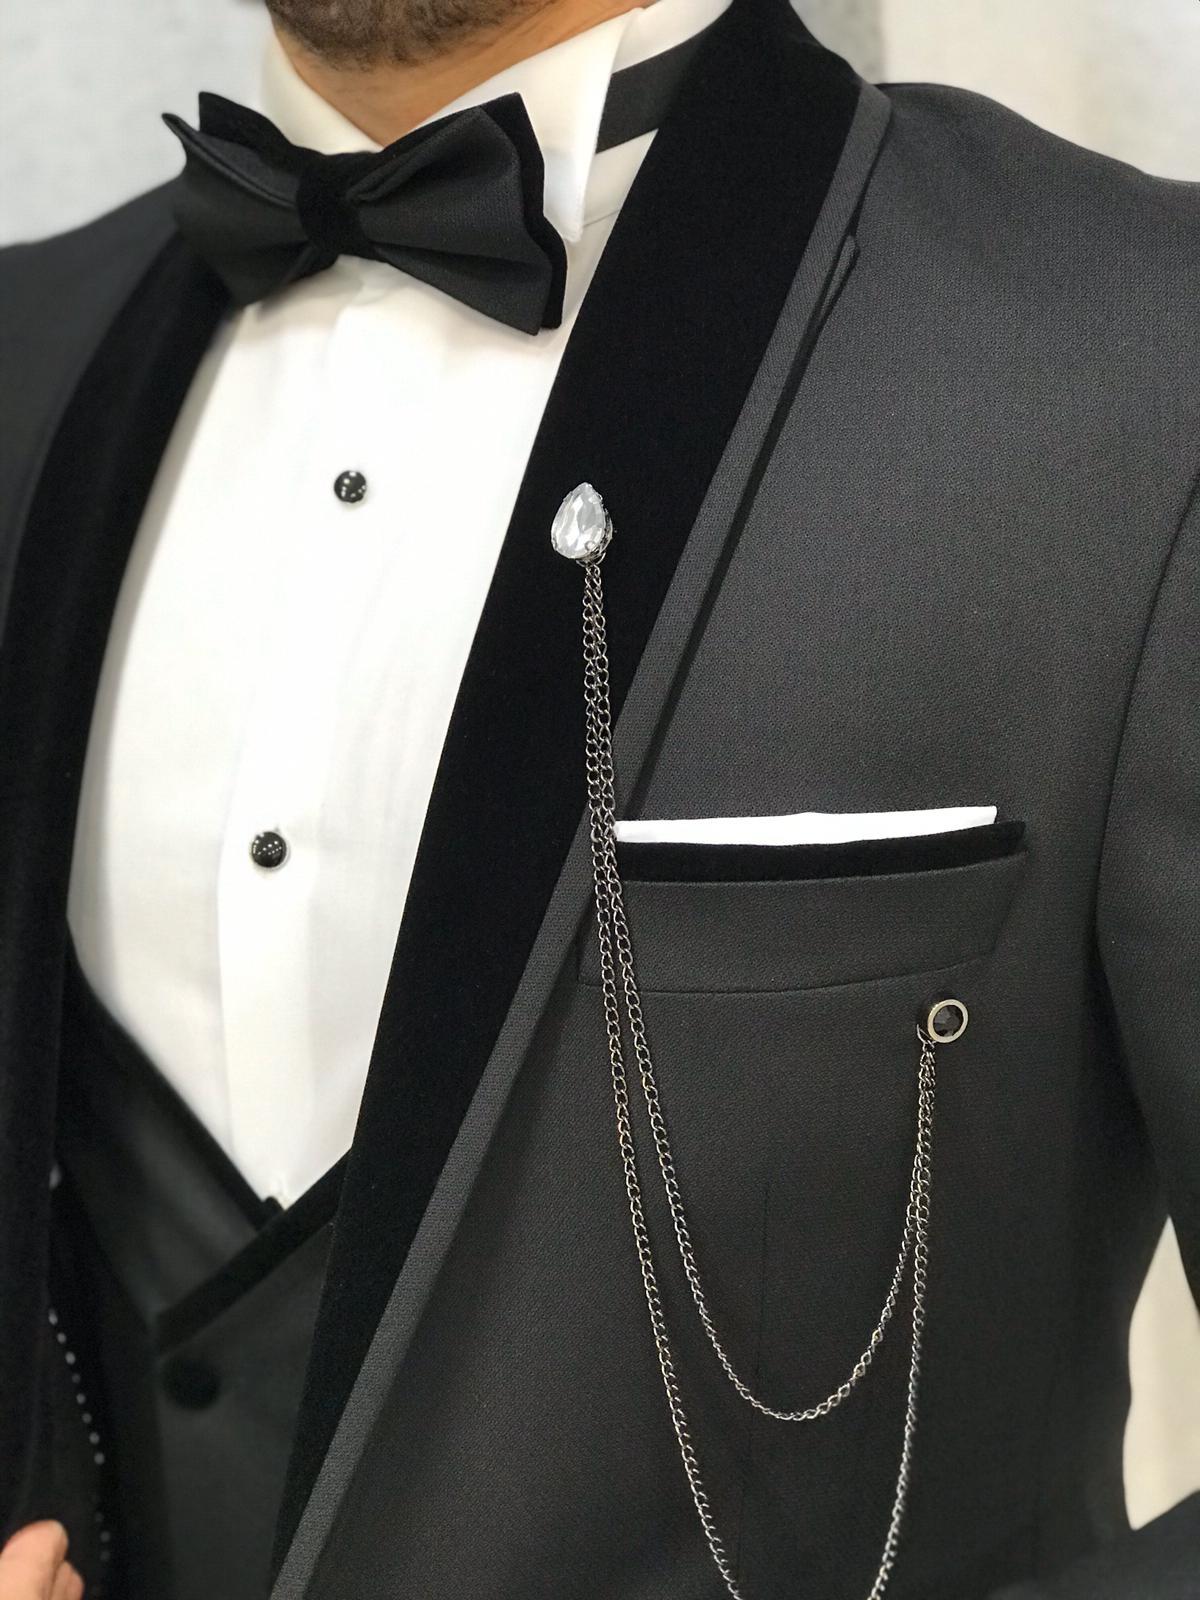 How to Style Black Tie Attire for Men on Special Occasions